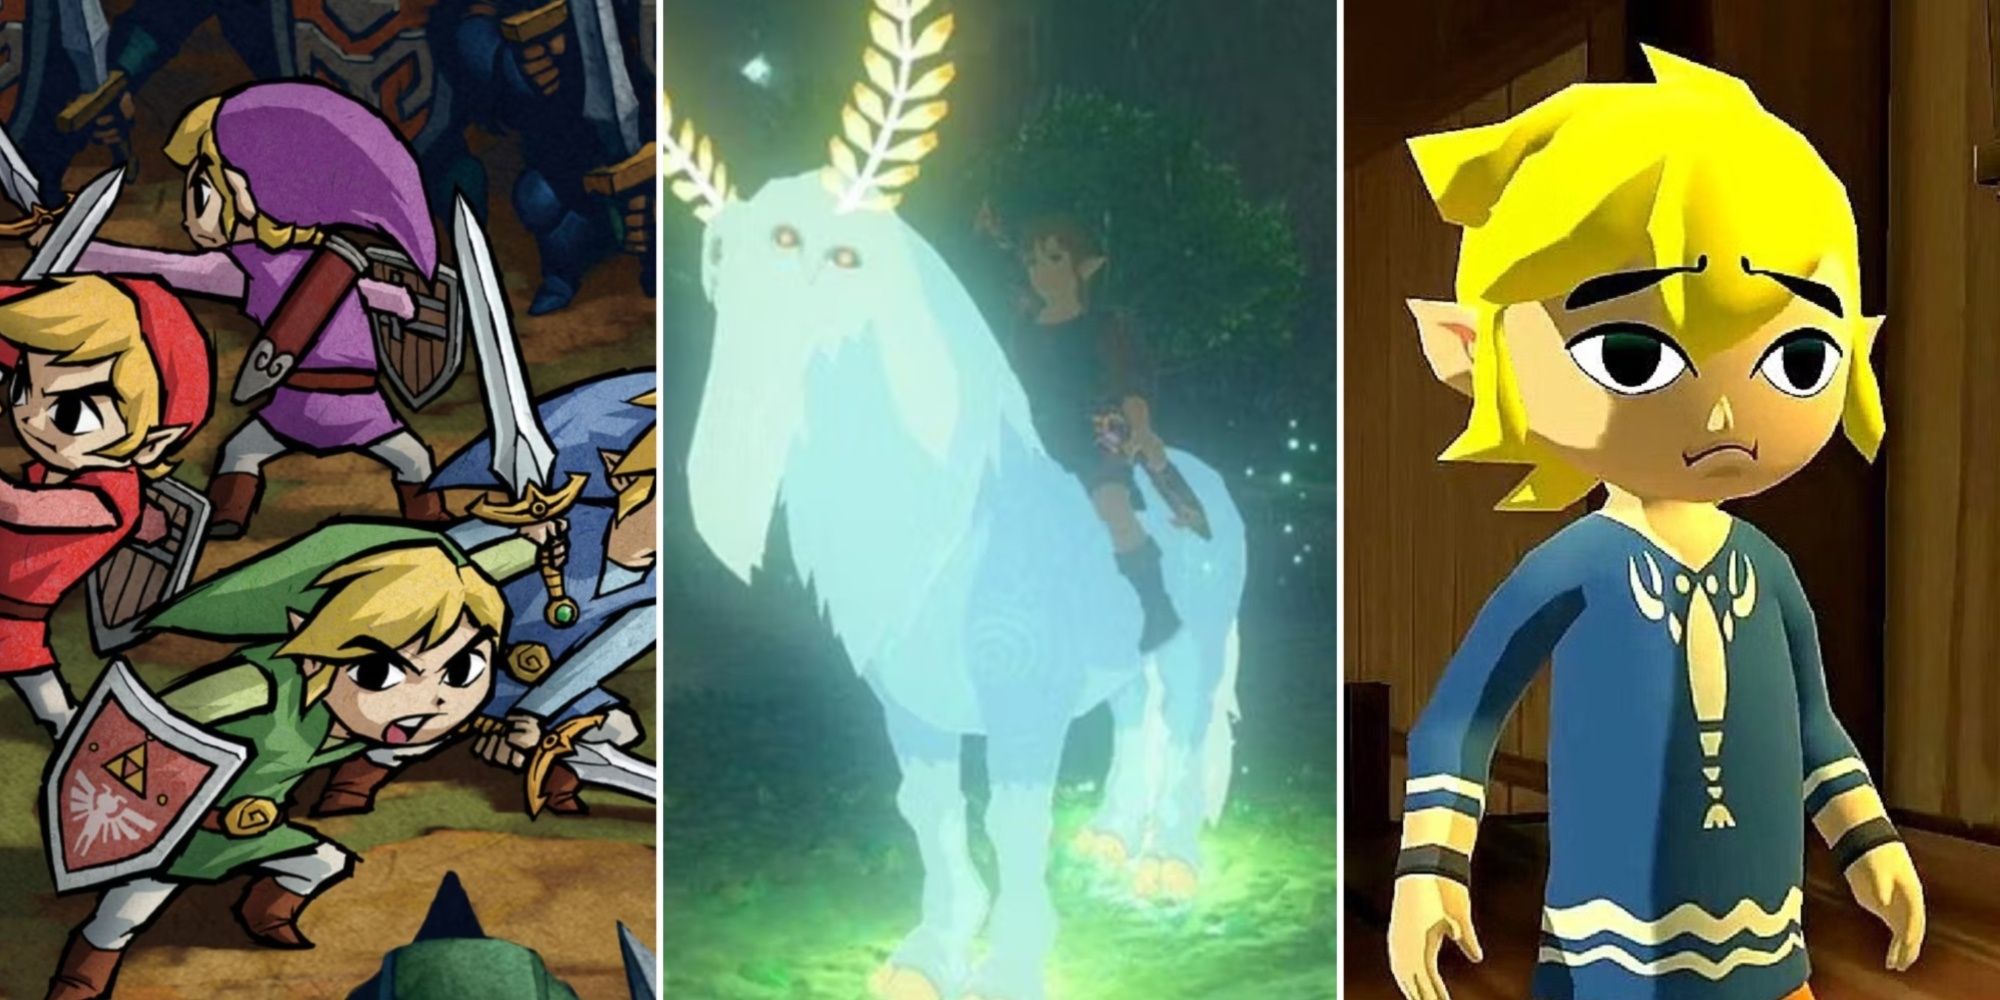 side by side images of different versions of Link in different games